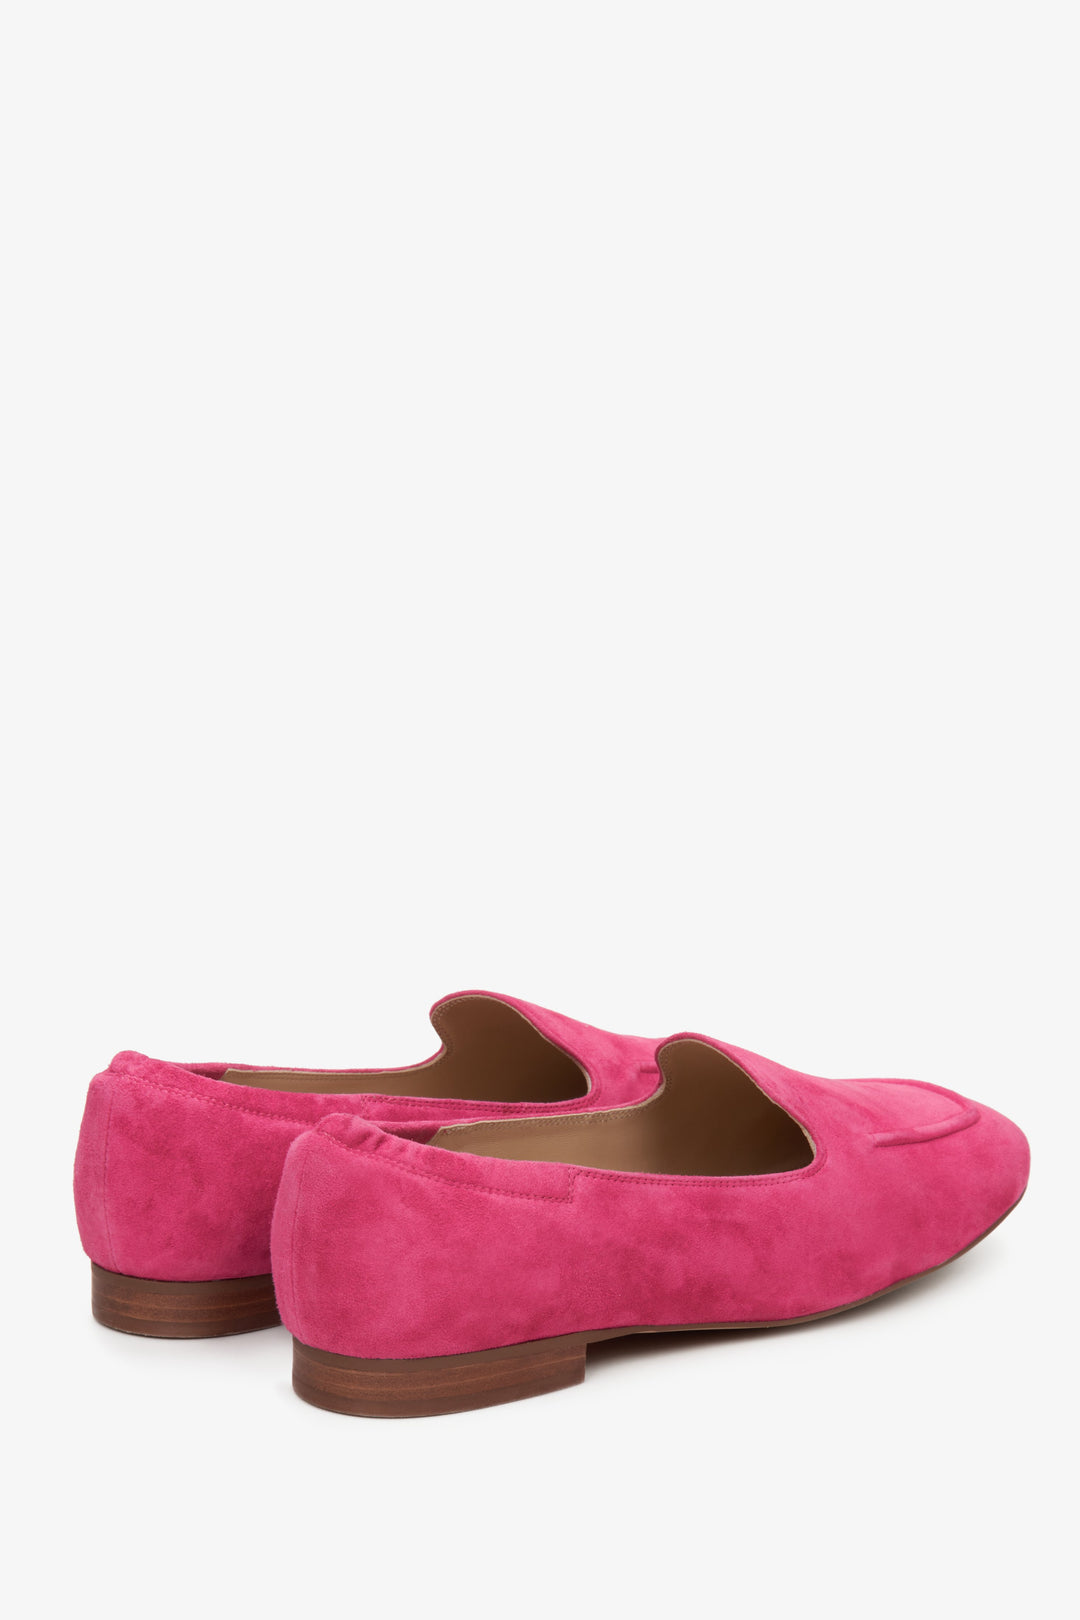 Women's Estro velour moccasins for fall in fuchsia - presentation of the heel and side vamp.